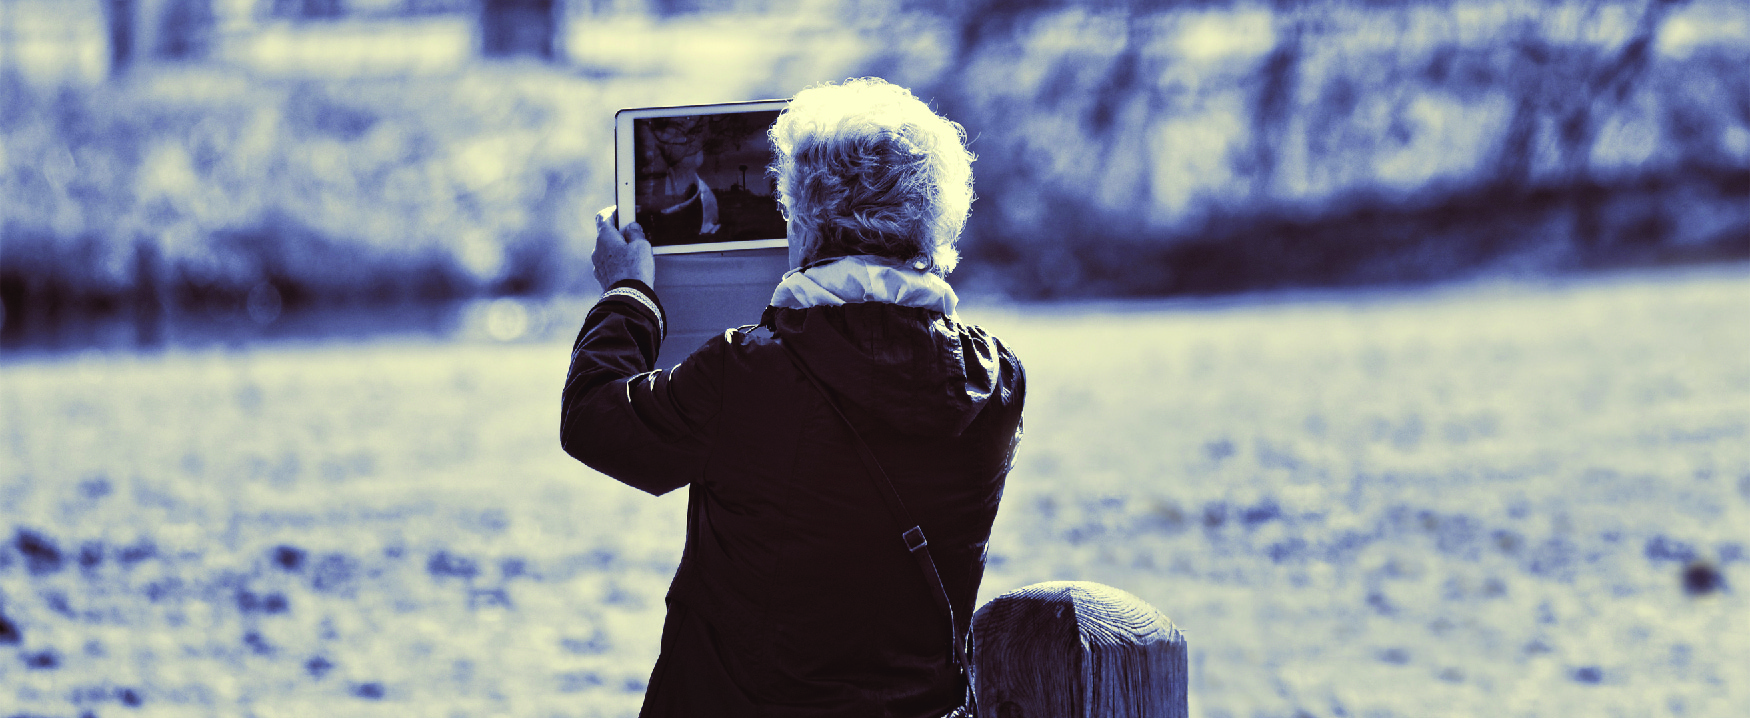 Picture of a person in a field by a stream holding up a computer tablet.